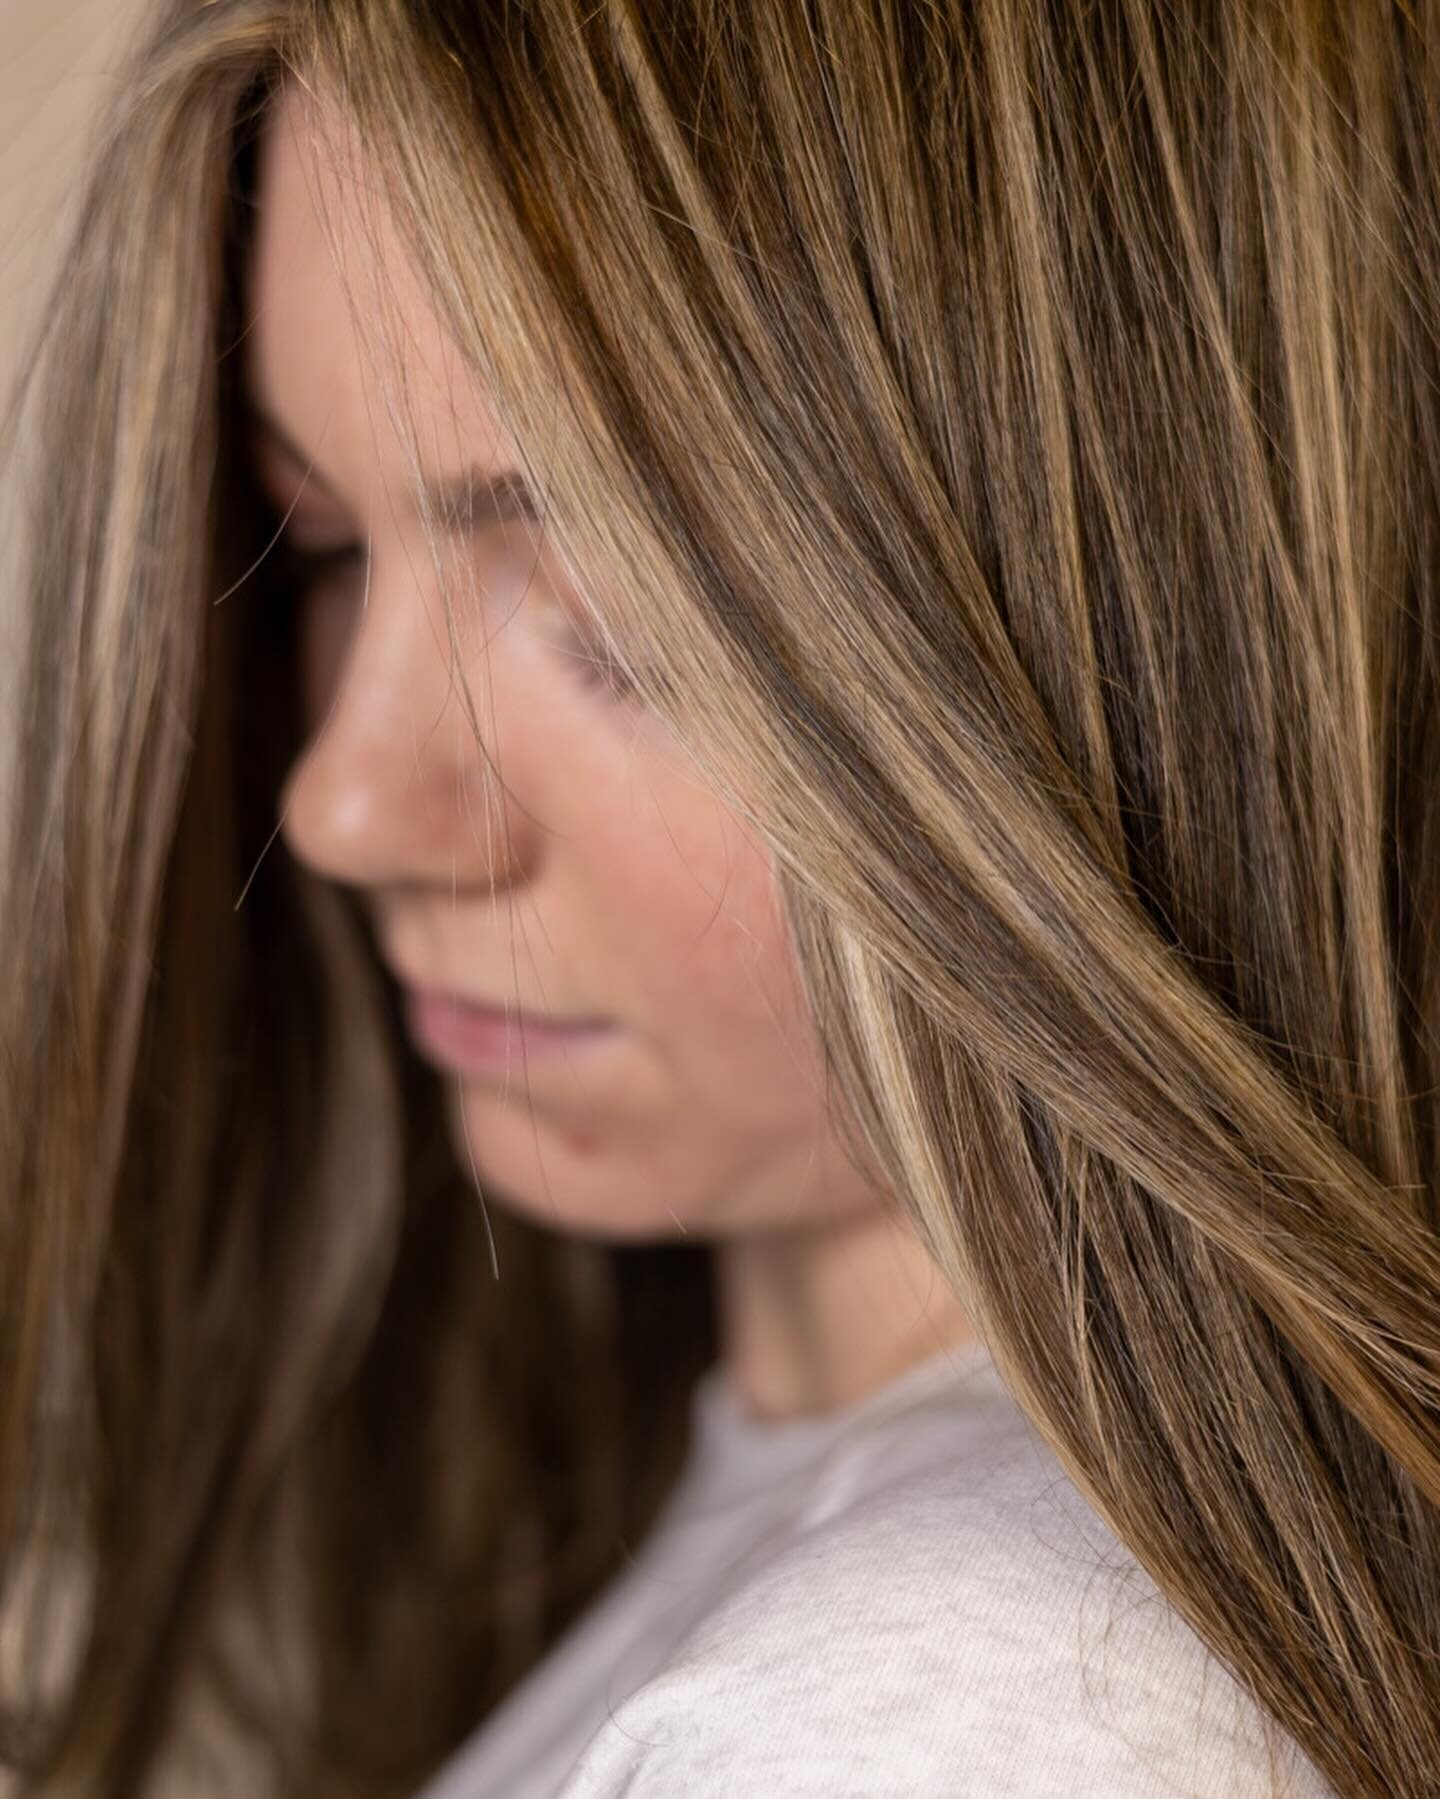 A dose of sunshine for this brunette 🌻 blonde really doesn&rsquo;t have to be all over, adding a little dimension does wonders. 

Cut and color by Taylor using @paulmitchellpro and @olaplex 

.
.
.
#misfitconcepts #paulmitchell #paulmitchellpro #pau